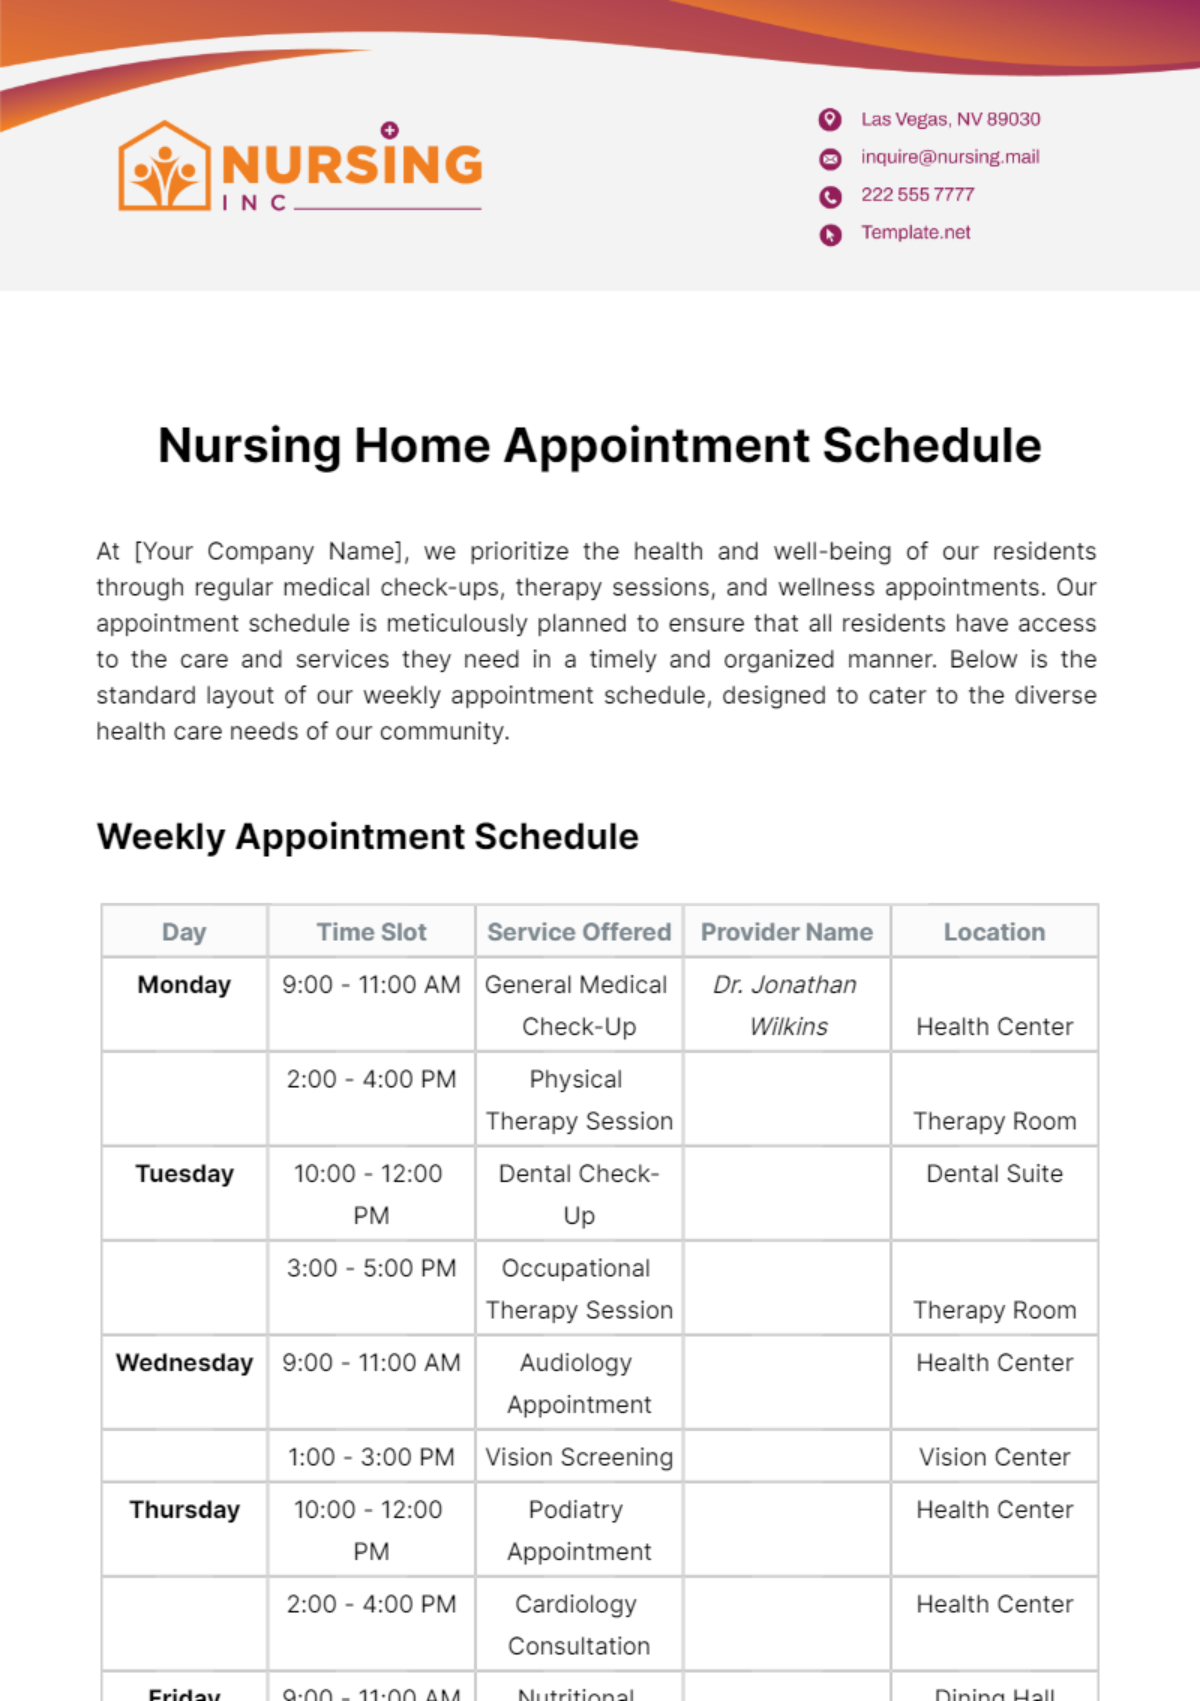 Nursing Home Appointment Schedule Template